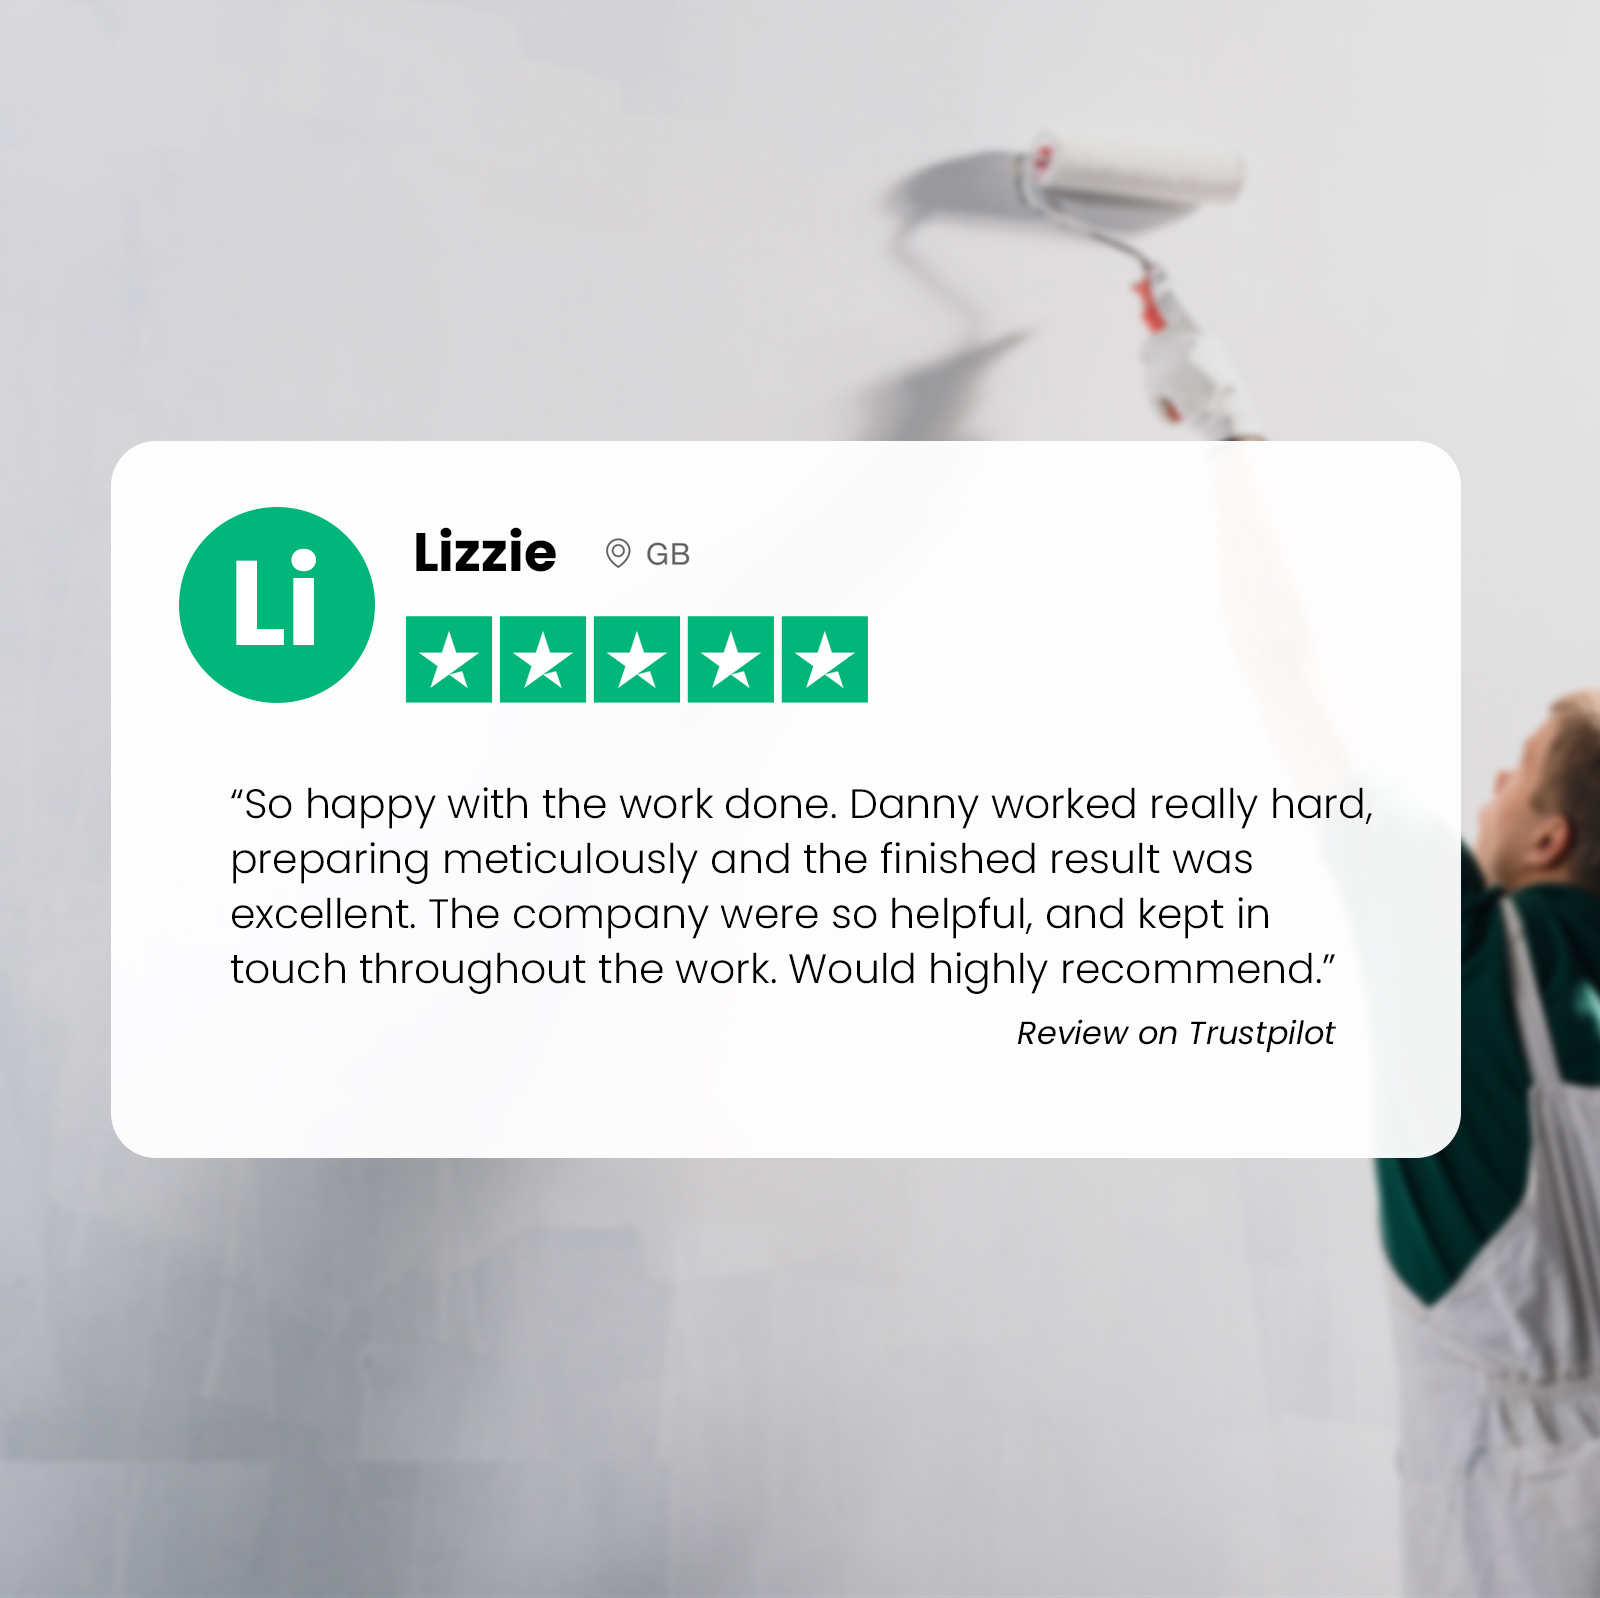 painting and decorating London MJ Kloss - Trustpilot Review